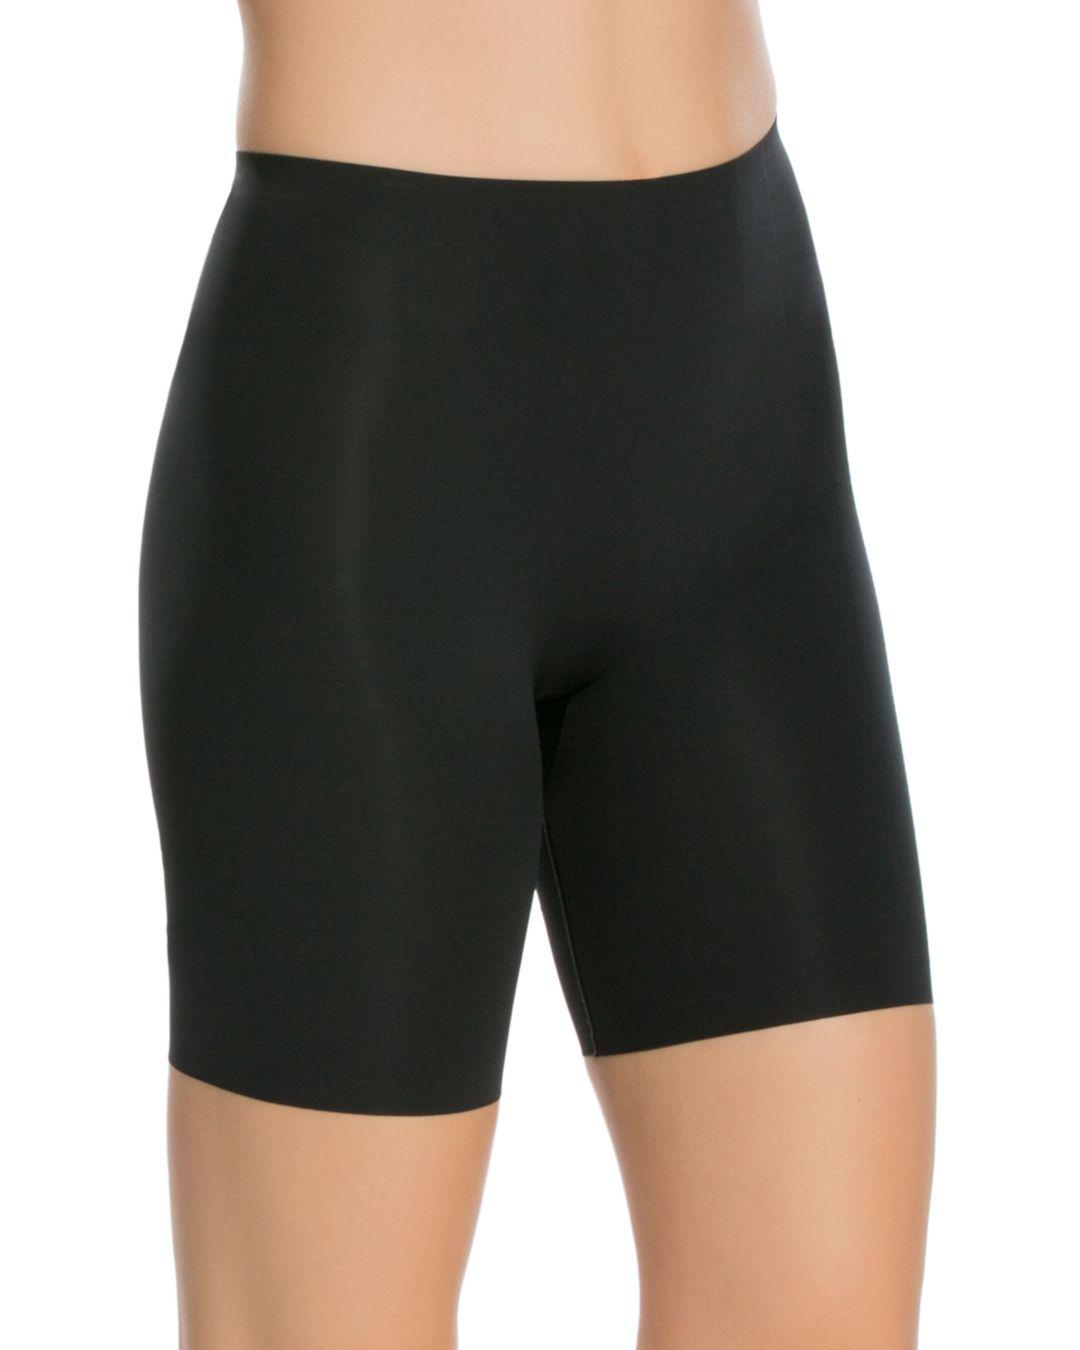 Lyst - Spanx Thinstincts Mid-thigh Shorts in Black